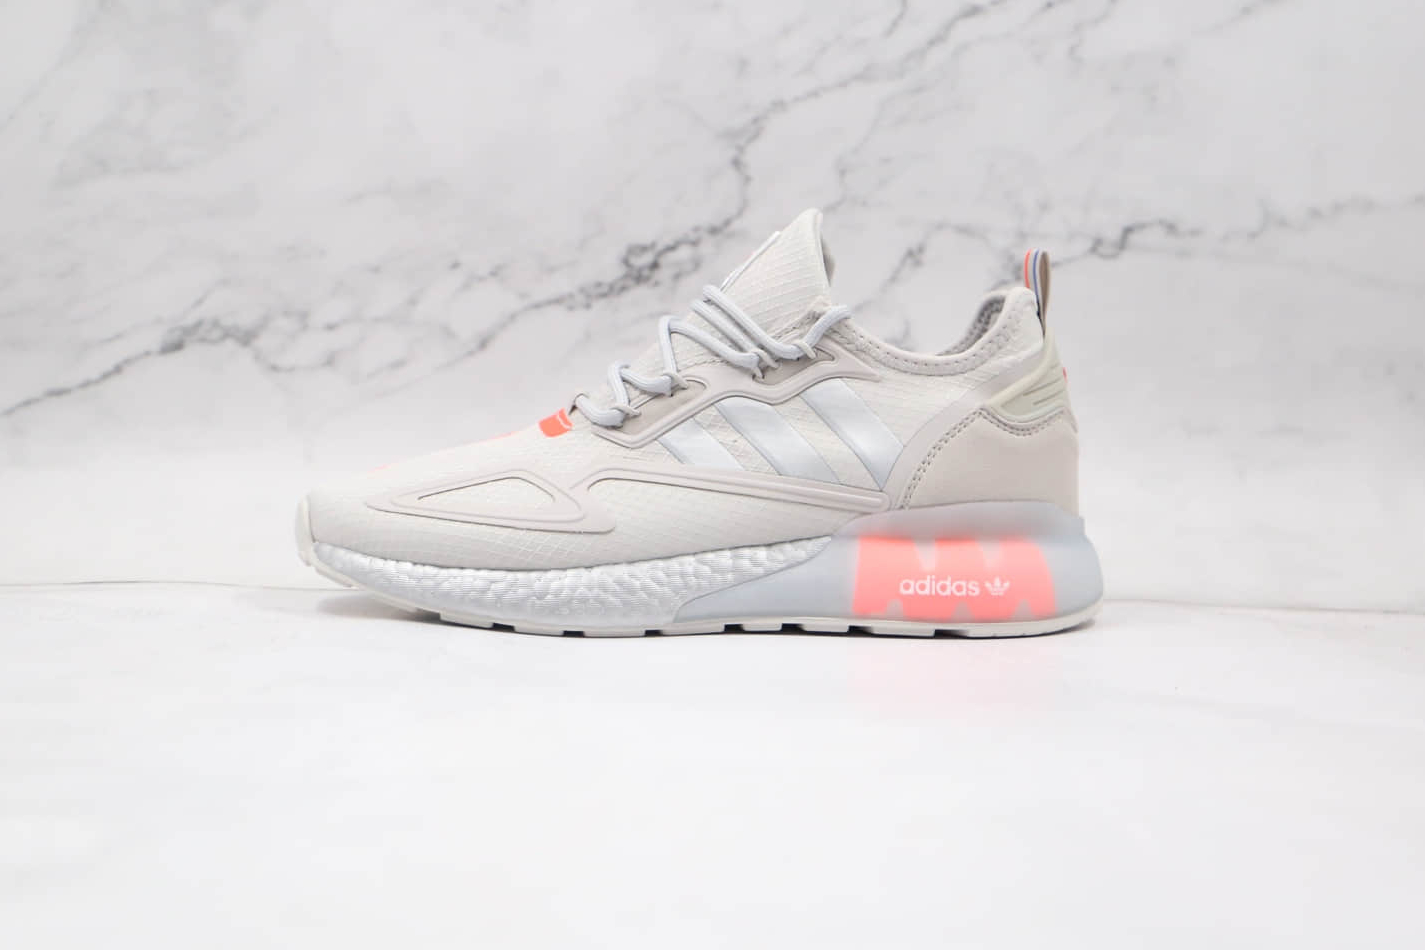 Adidas ZX 2K Boost Grey Silver Metallic FX7028 – Shop Now at [Website Name]